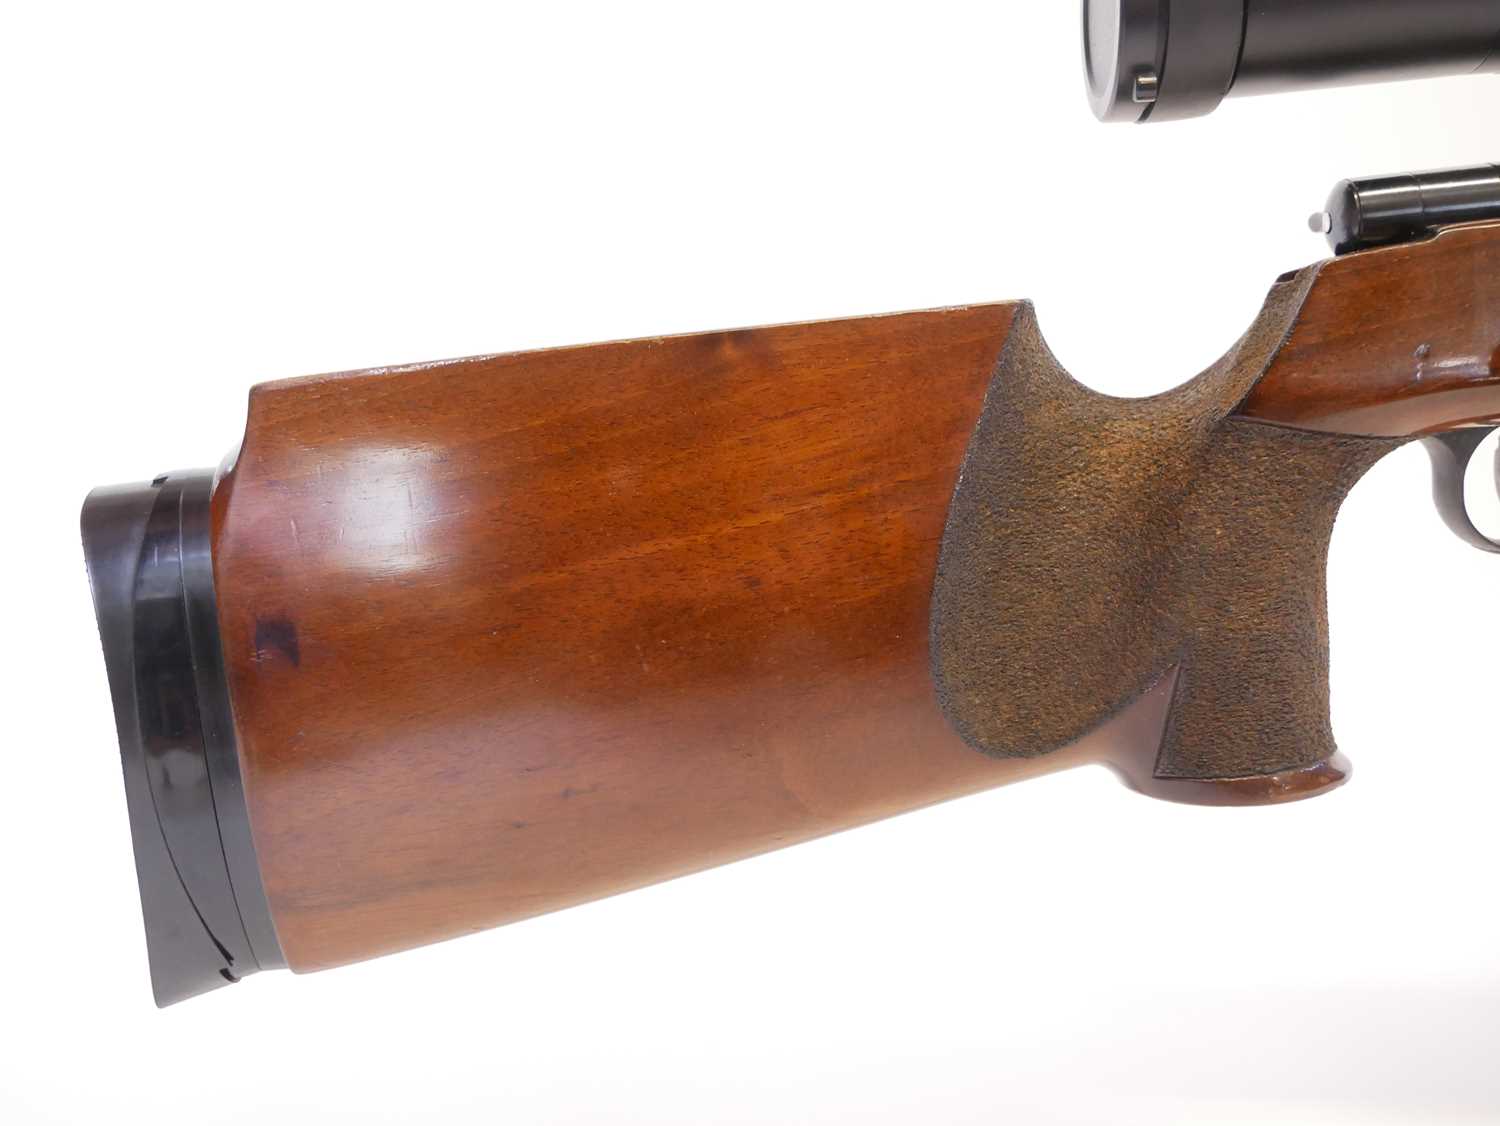 Anschutz .22 Model Match 54 bolt action rifle, serial number 111294, 26inch heavy profile barrel, - Image 3 of 12